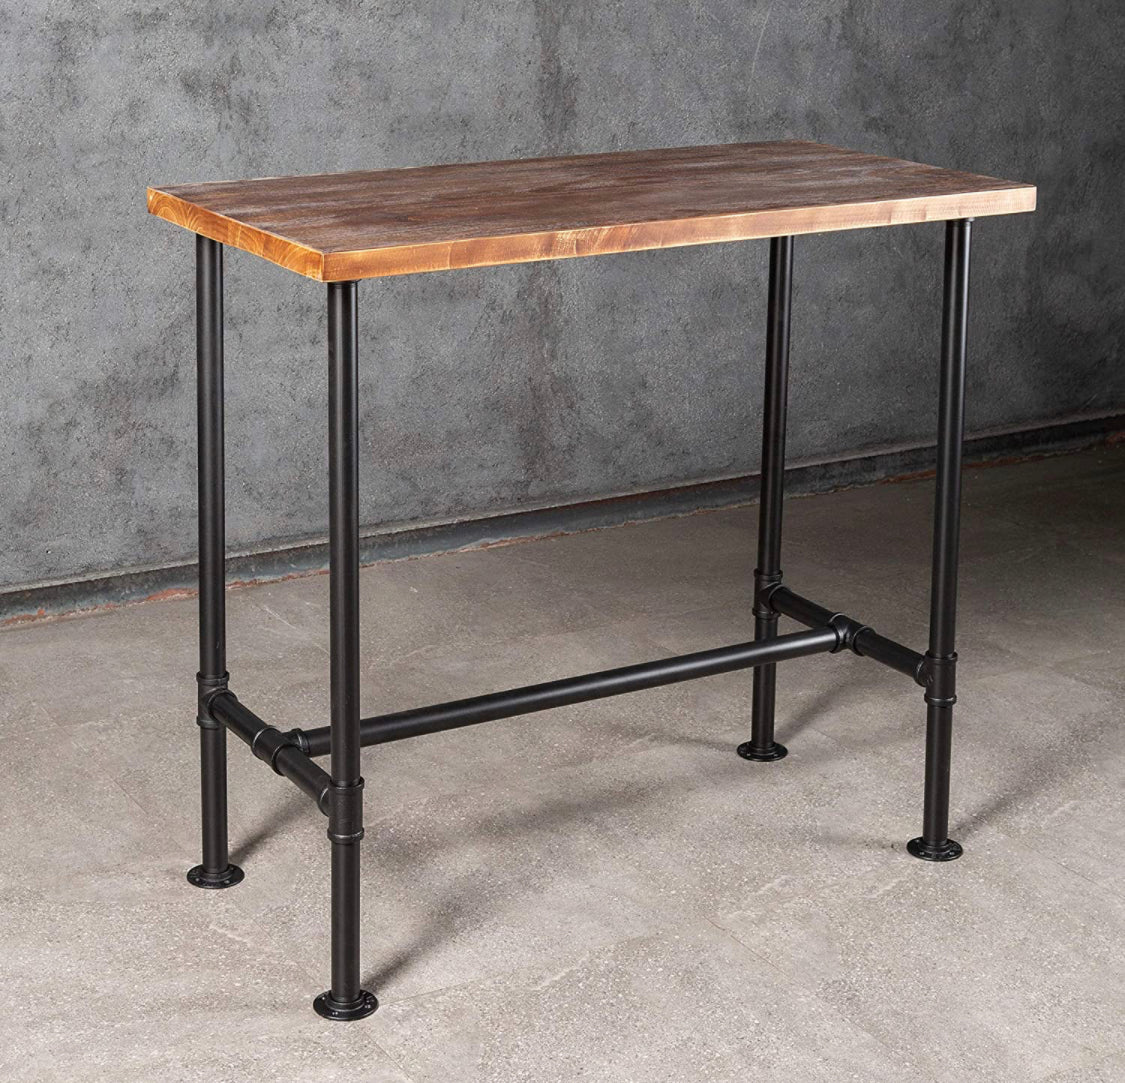 Diwhy DIY Industrial Design Pipe Dining Table Casual Pub BAR Laptop Table Modern Studio Wood and Metal Rectangular Dining Table homeoffice Desk Breakfast high bar Table